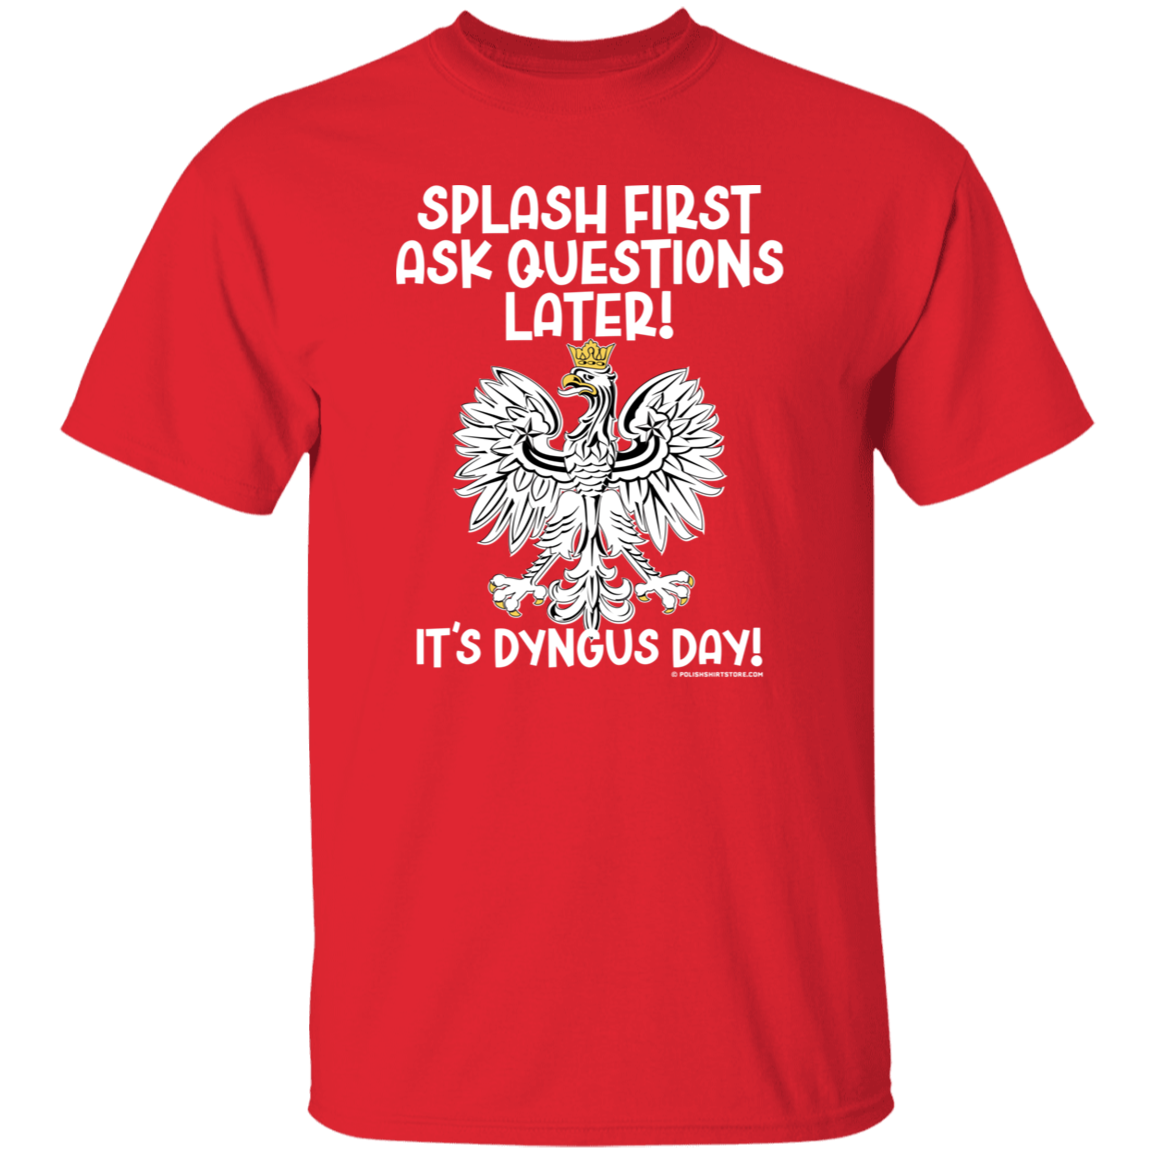 Dyngus Day Splash FIrst Ask Questions Later Apparel CustomCat G500 5.3 oz. T-Shirt Red S